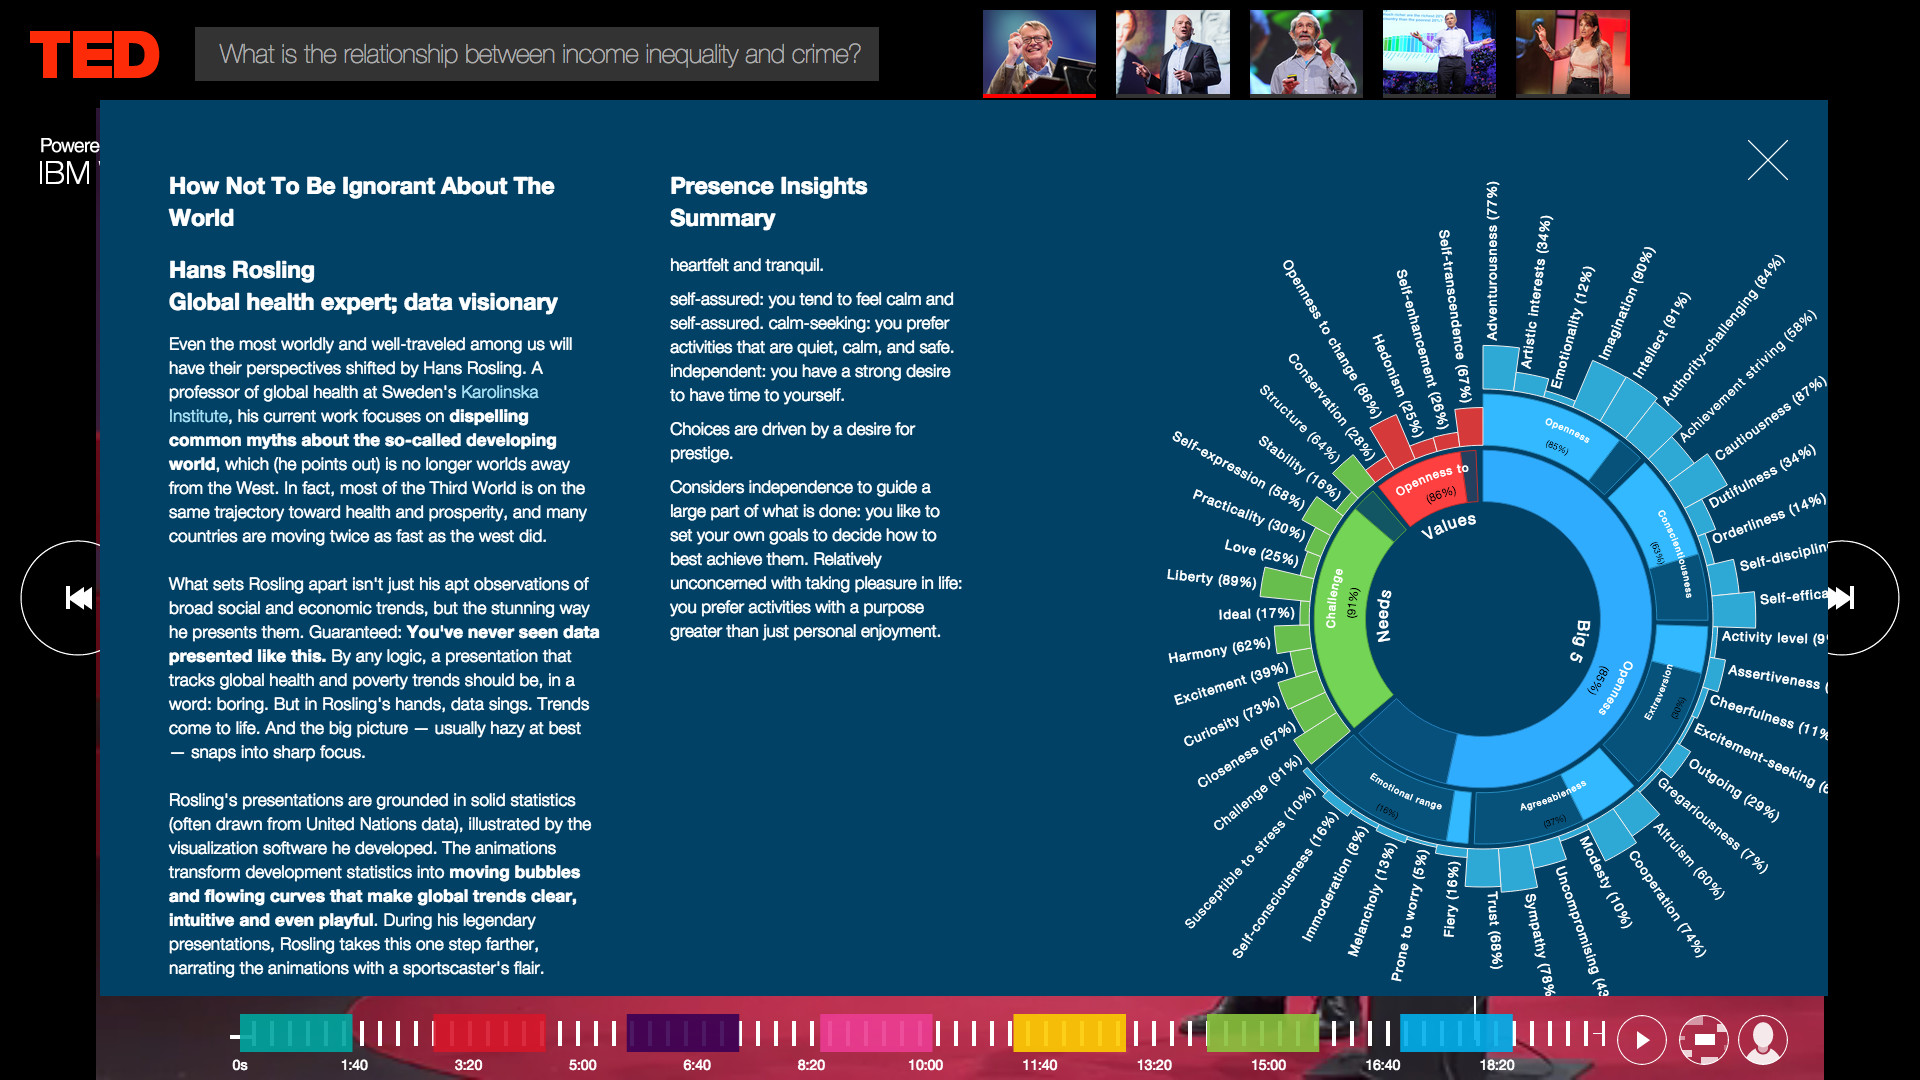 1920x1080 IBM Watson Ted personality insights